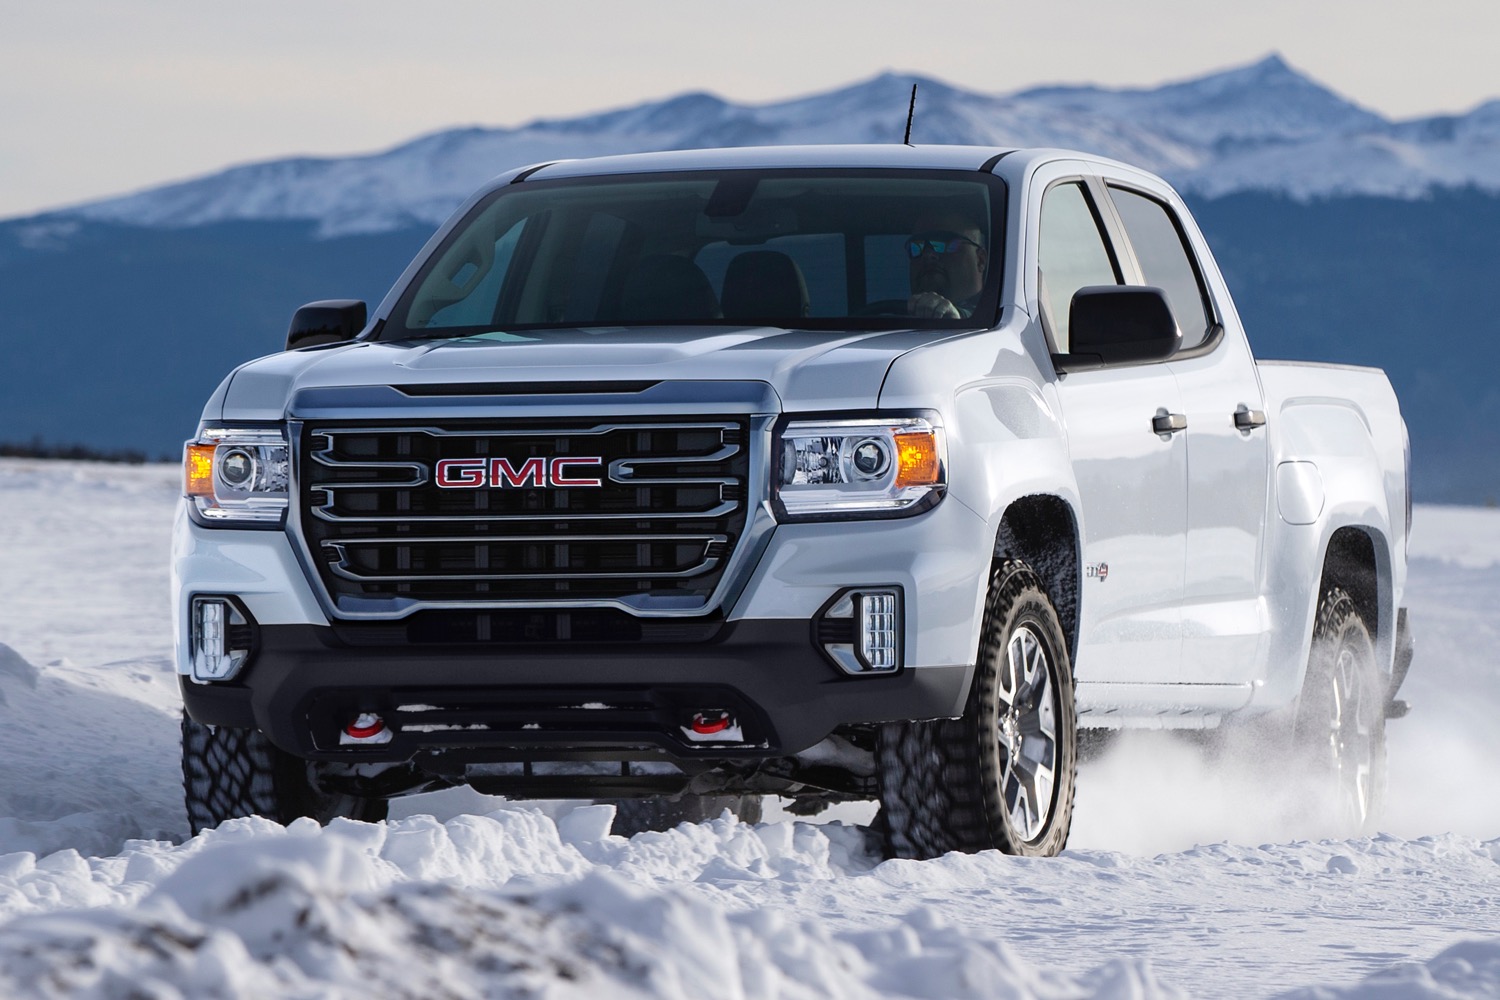 2021 Gmc X Ray Price and Review